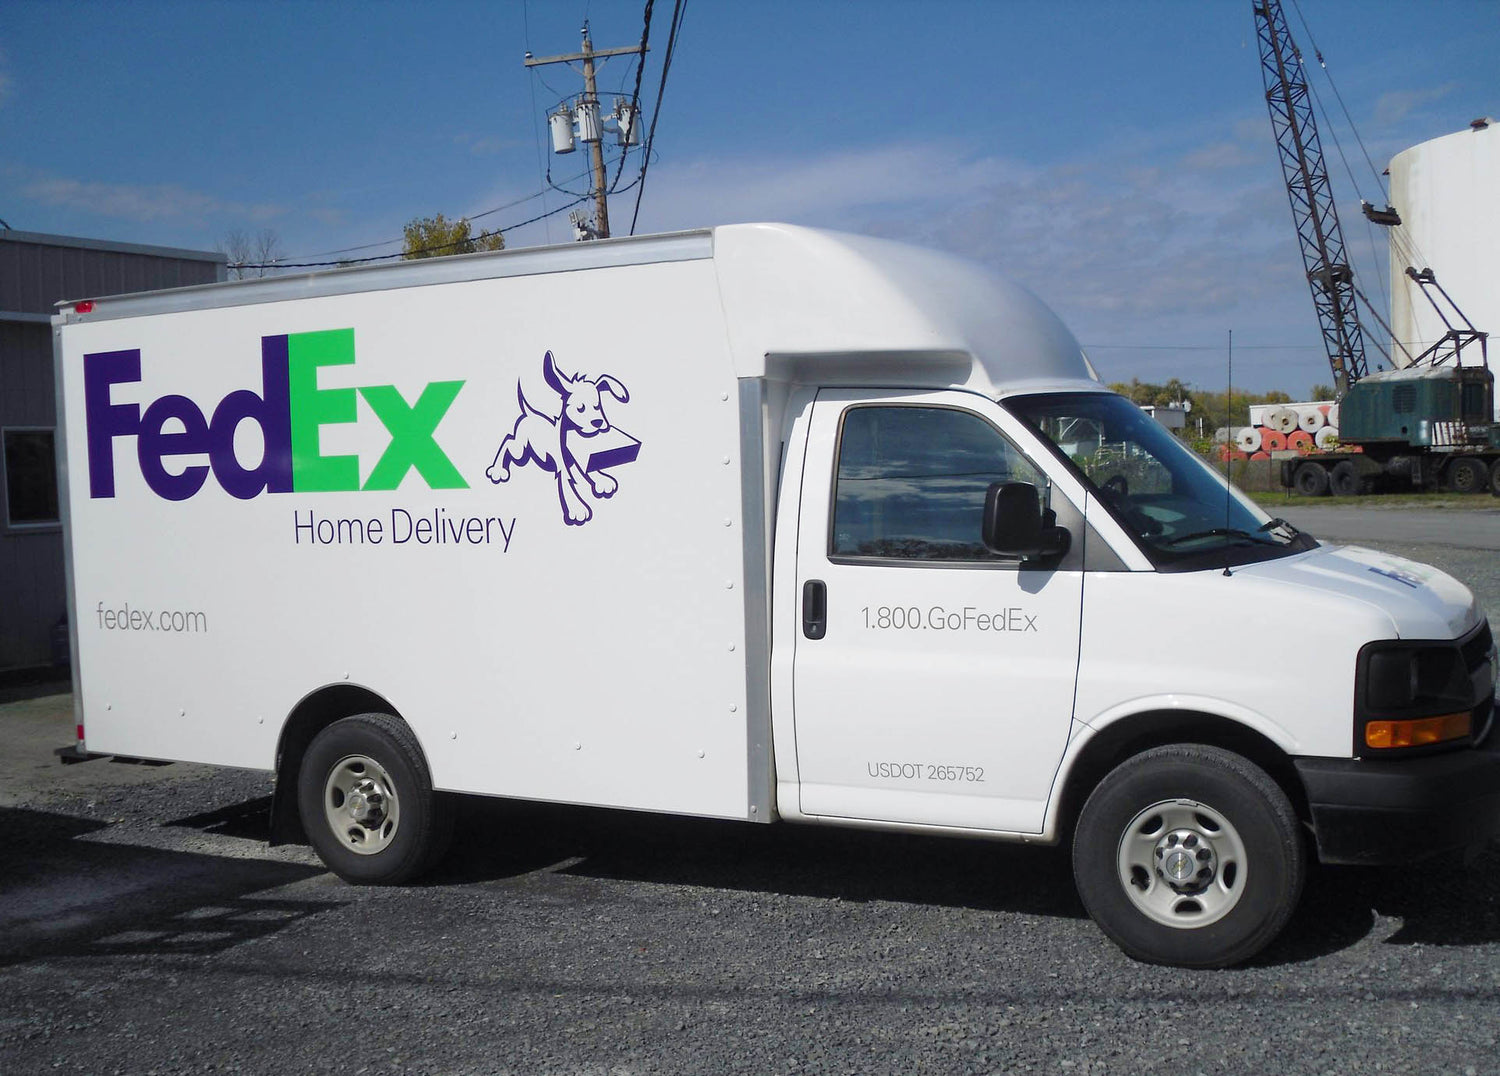 Cast vinyl decals installed on delivery van by All Signs & Graphics Inc. Purple and green FedEx logo with dog and "home delivery" vinyl letting is pictured.